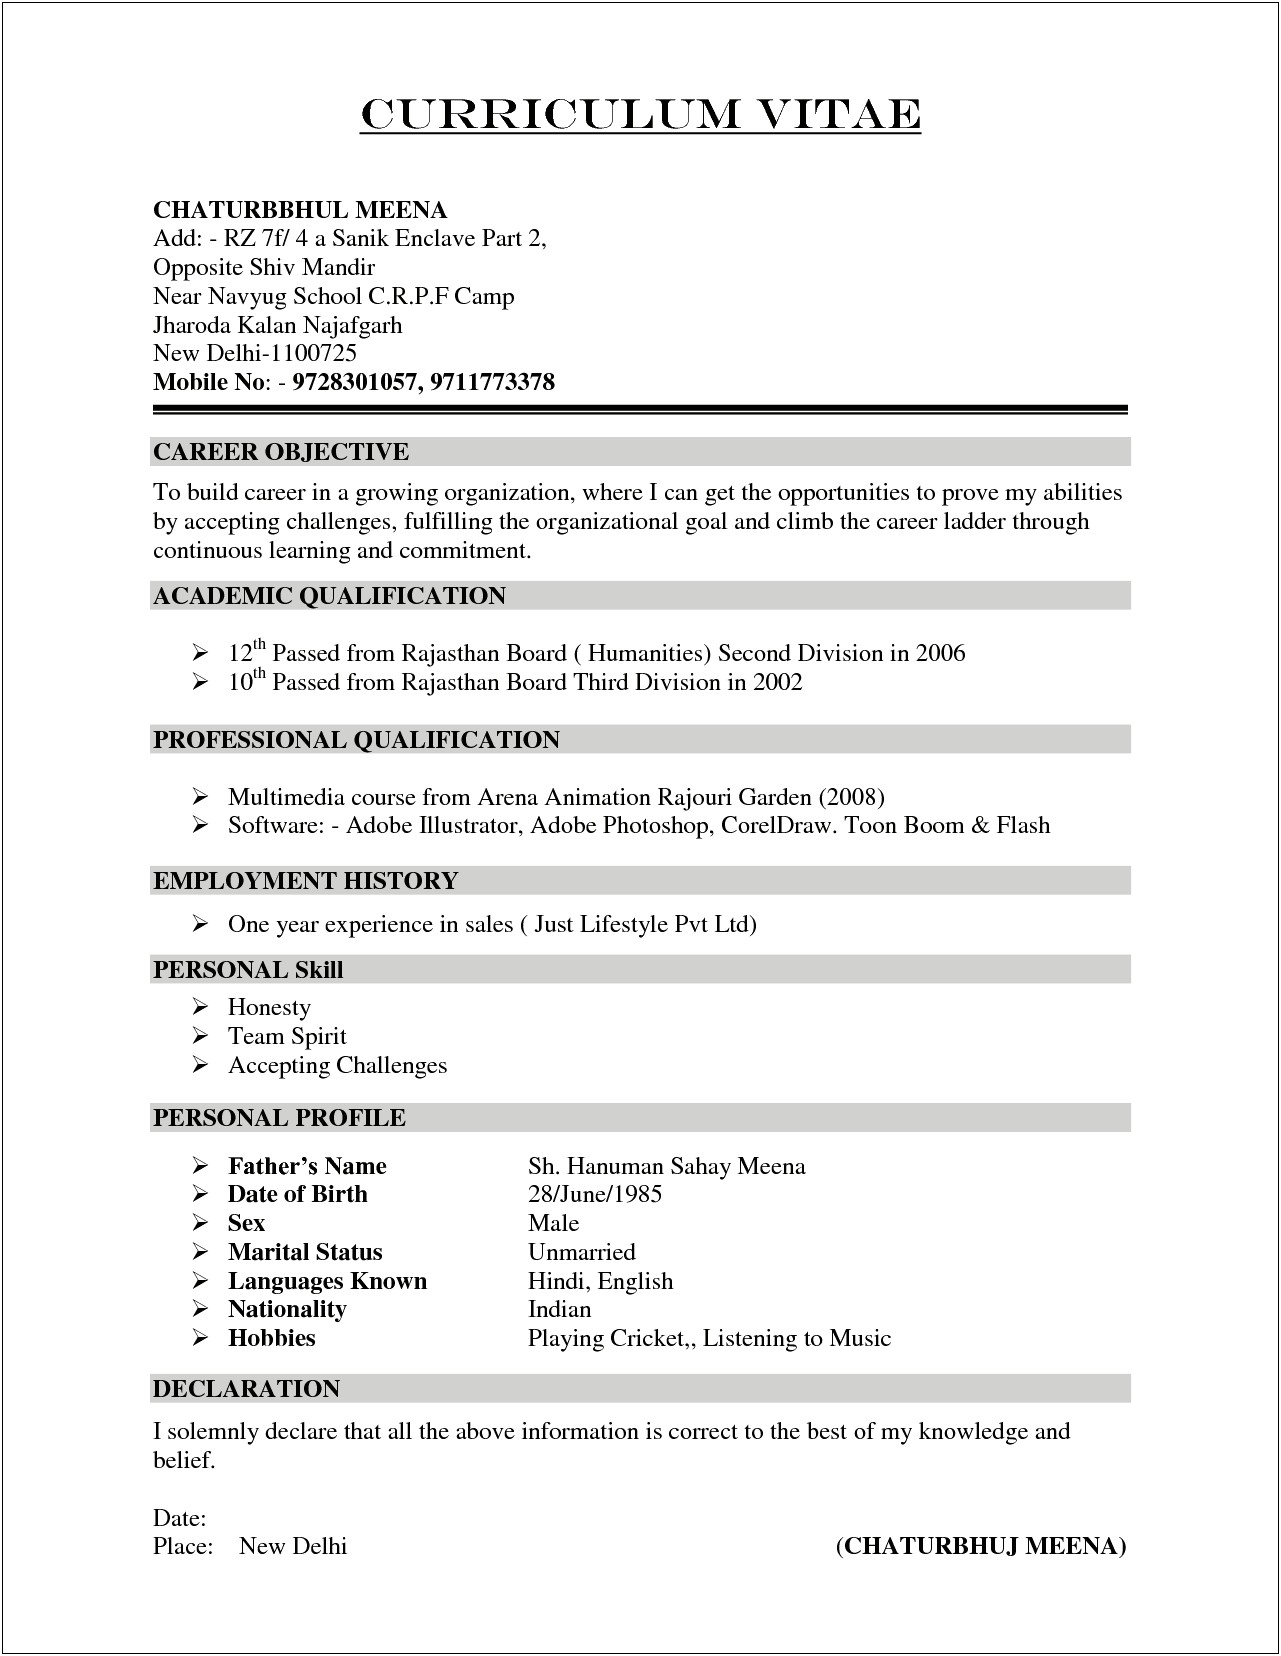 Examples Of Hobbies On A Resume